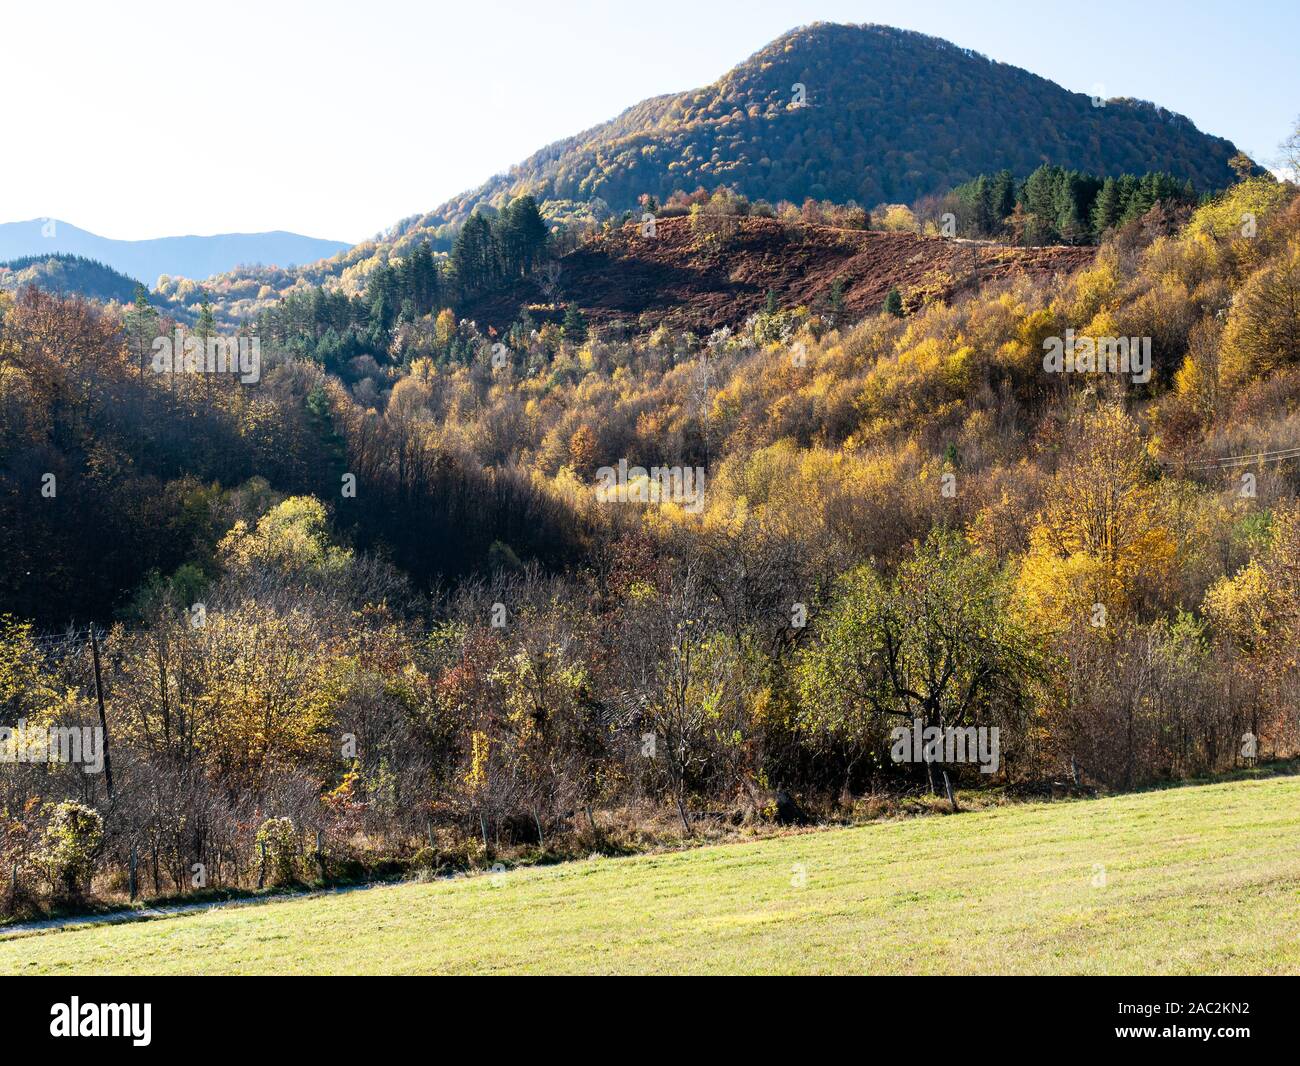 Autumn in the mountains. Nature has painted in pastel colors the leaves of trees, shrubs and grasses. Stock Photo